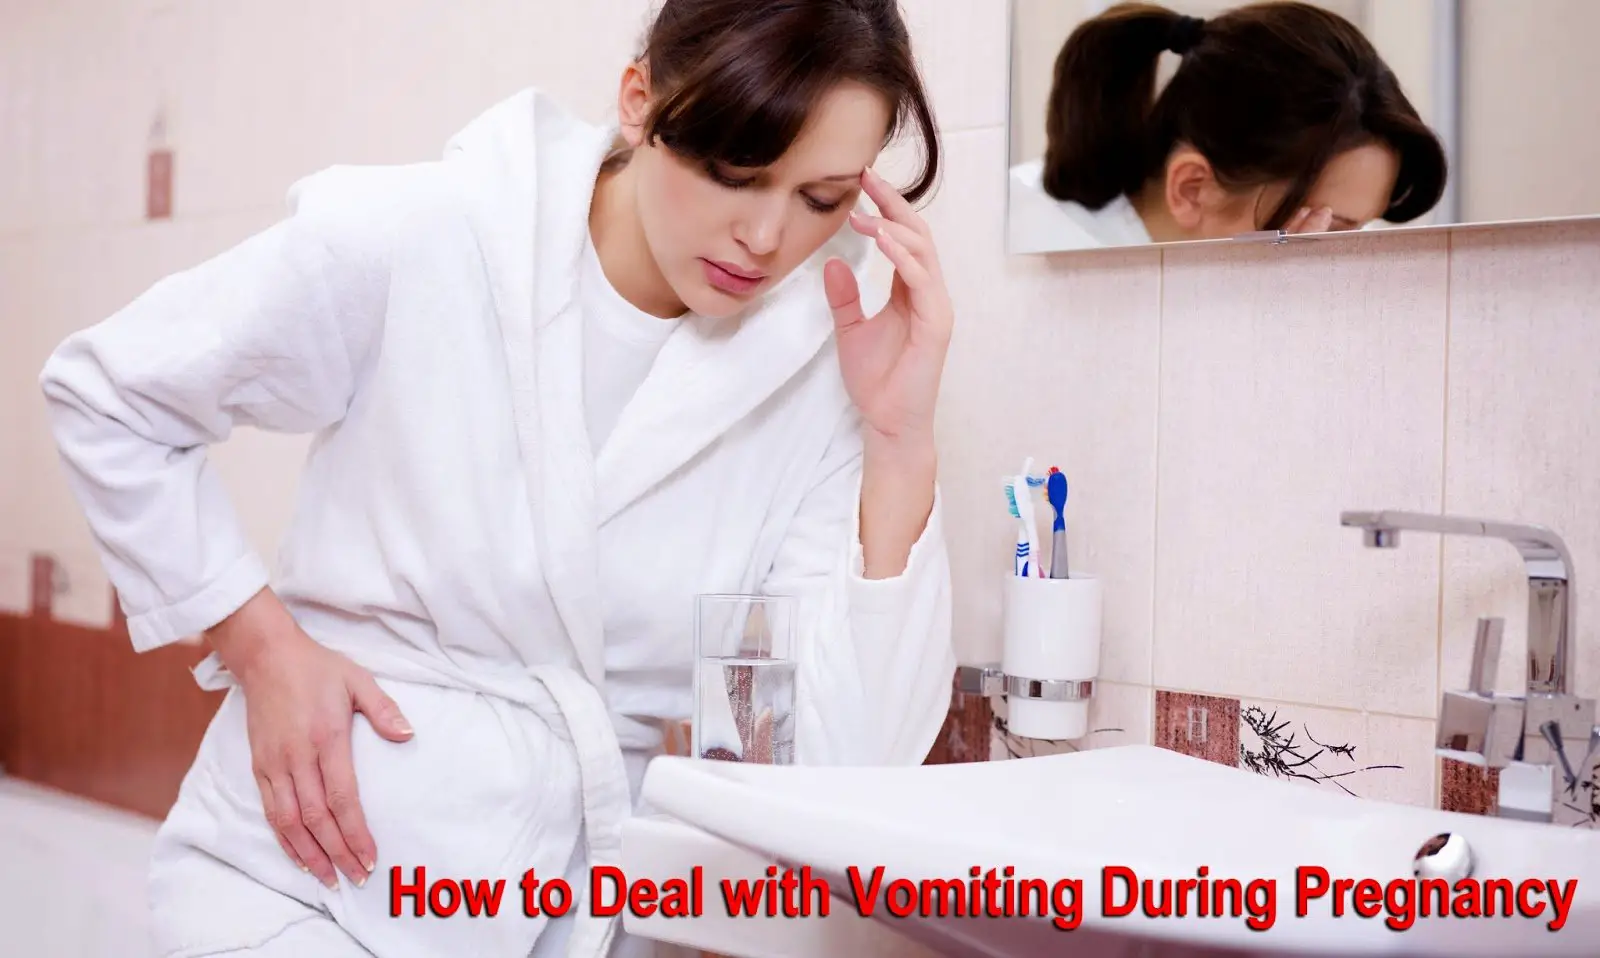 How to Deal with Vomiting During Pregnancy